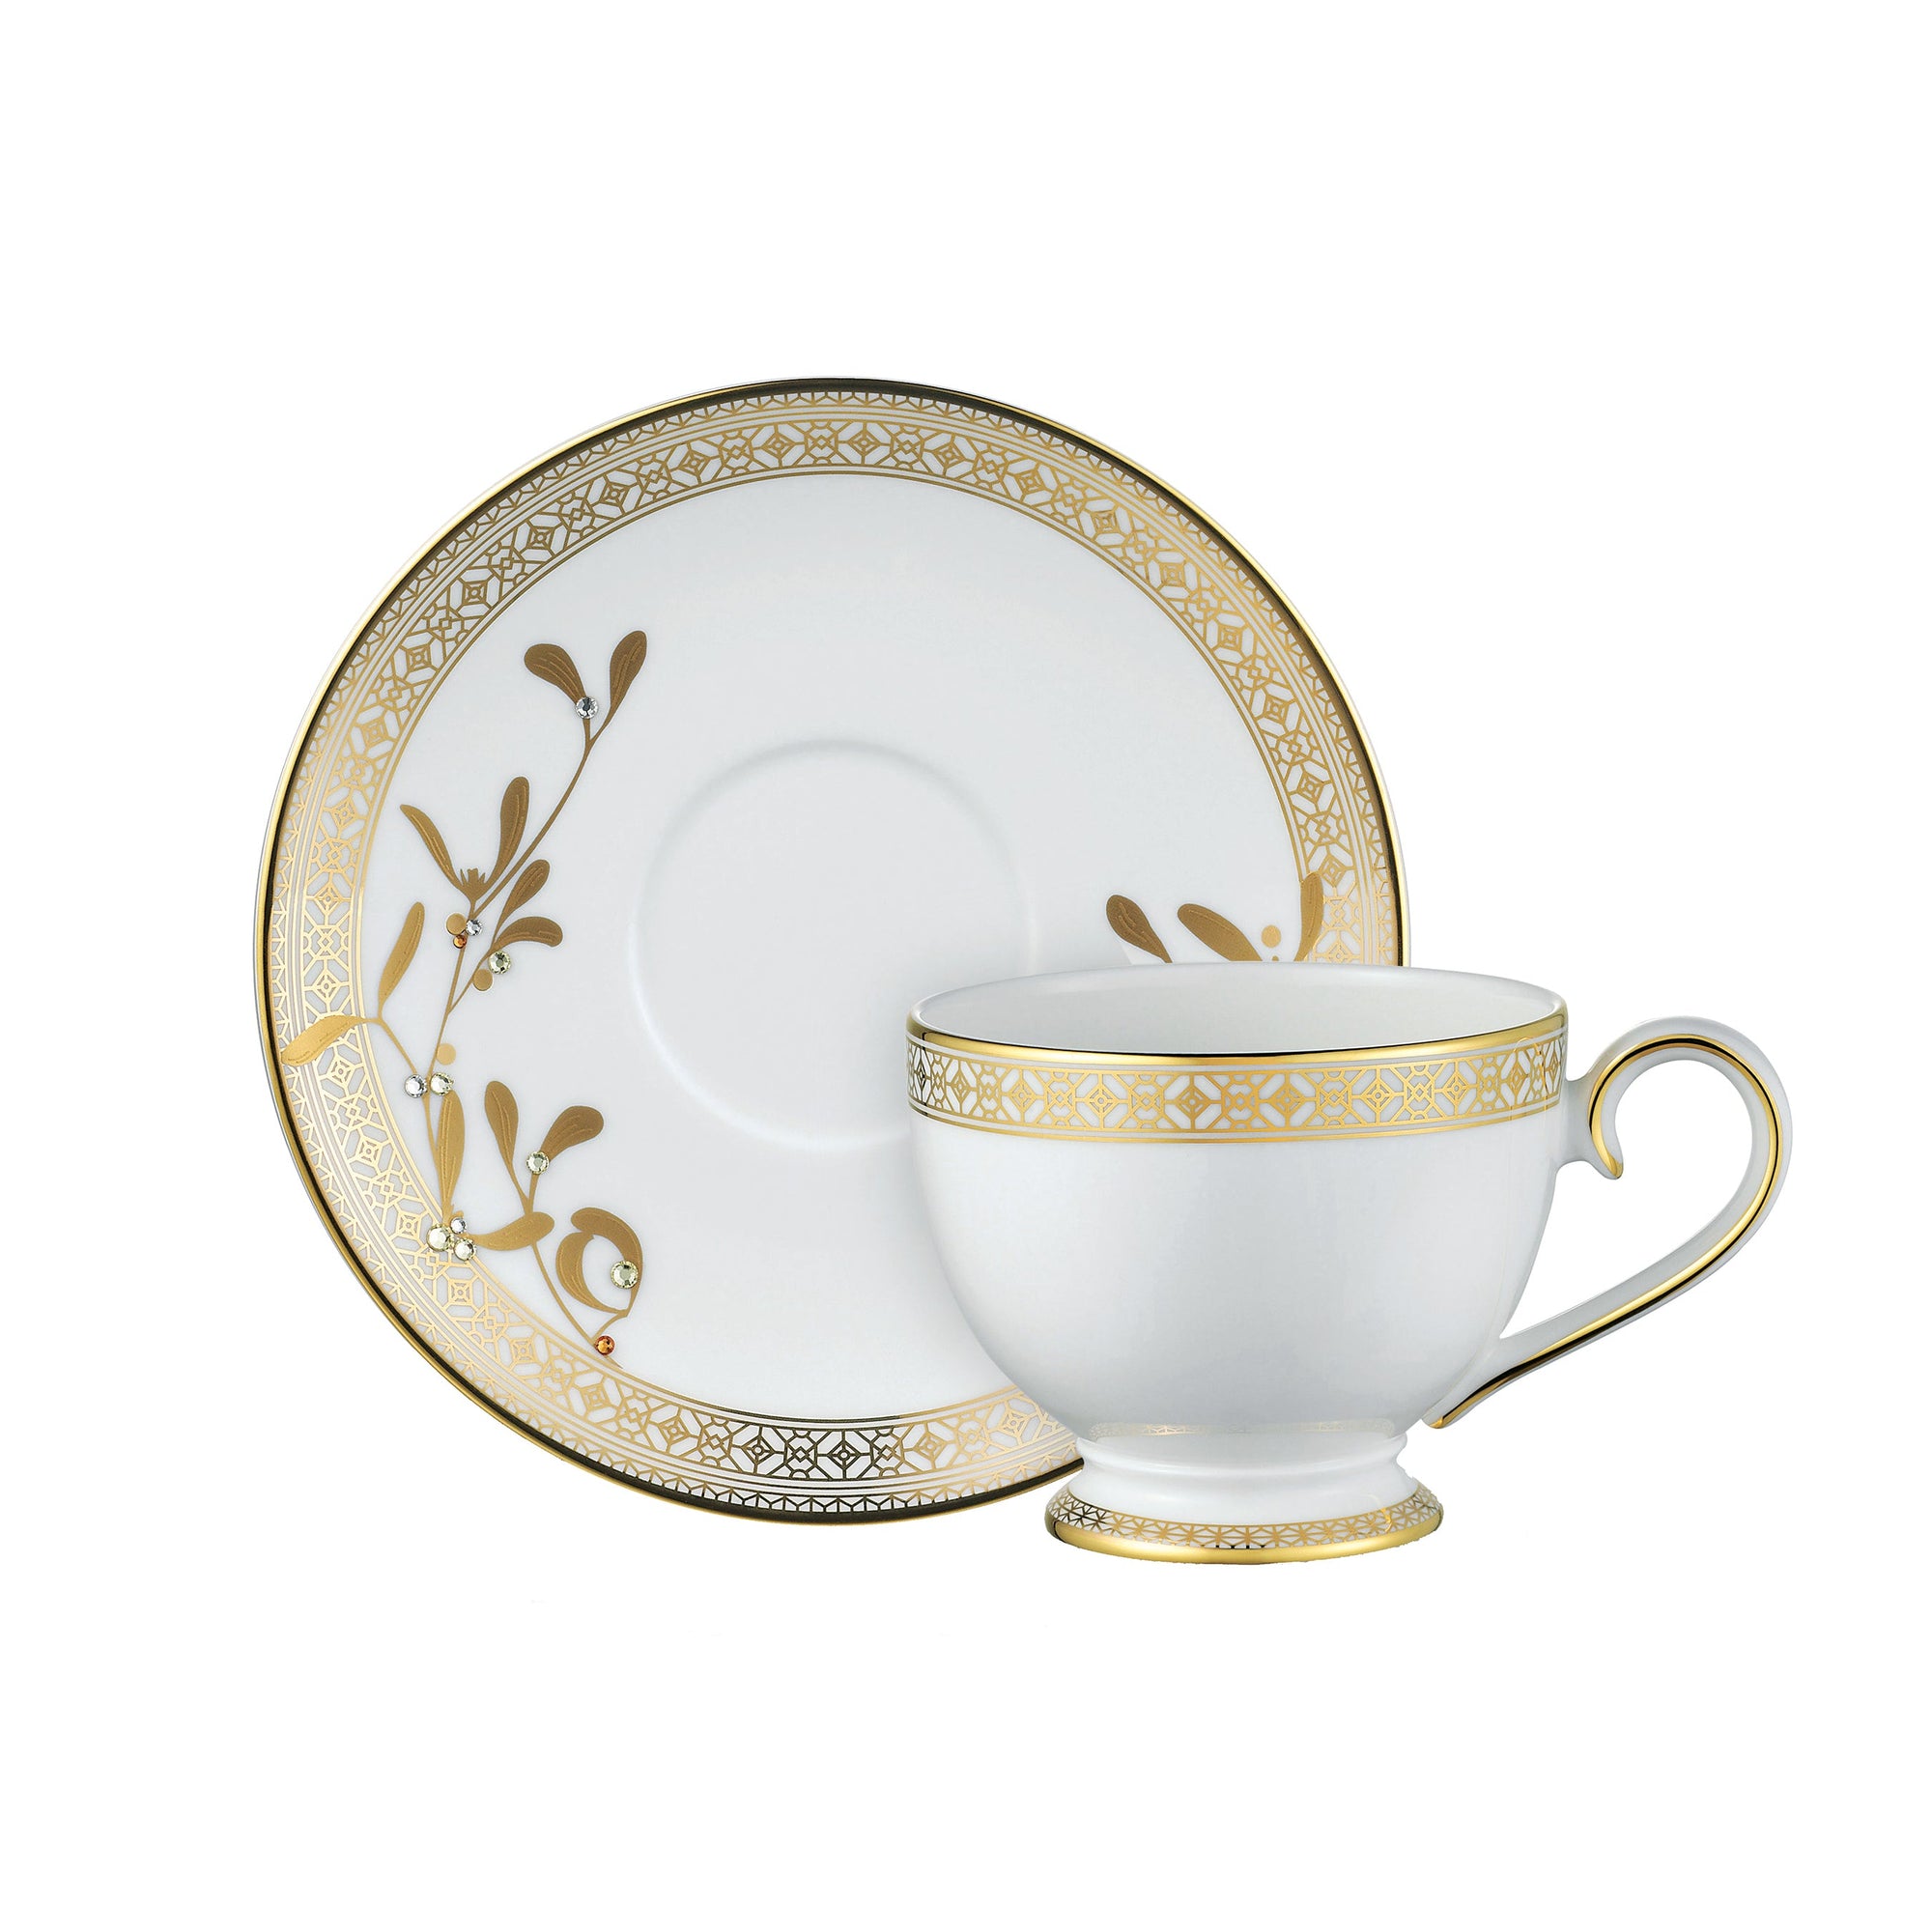 Prouna Golden Leaves Tea Cup & Saucer White Background Photo